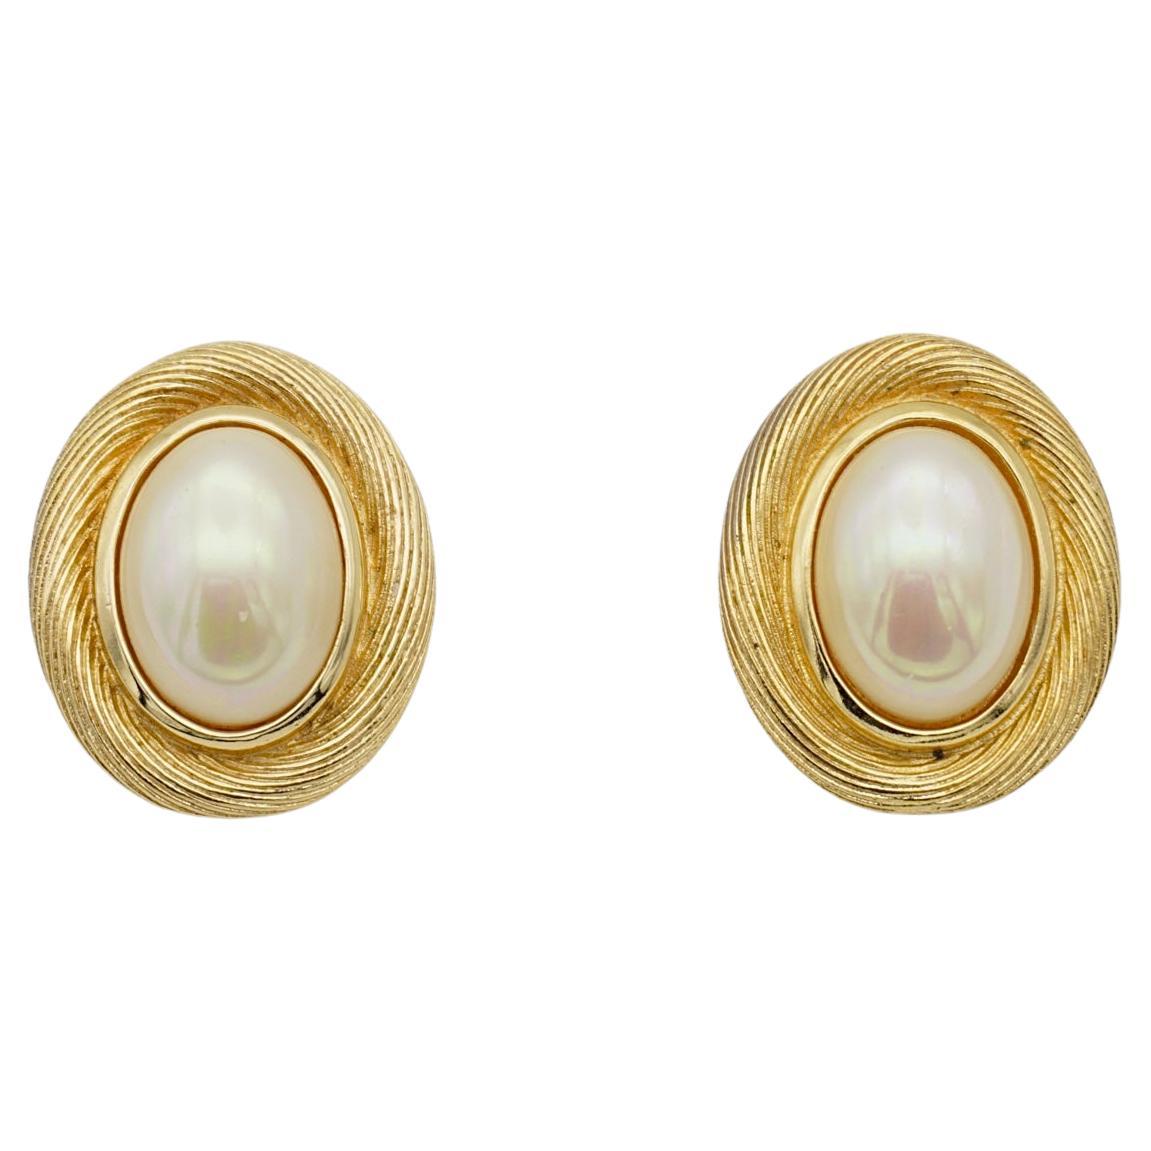 Christian Dior Vintage 1980s Large Oval White Pearl Retro Gold Pierced Earrings